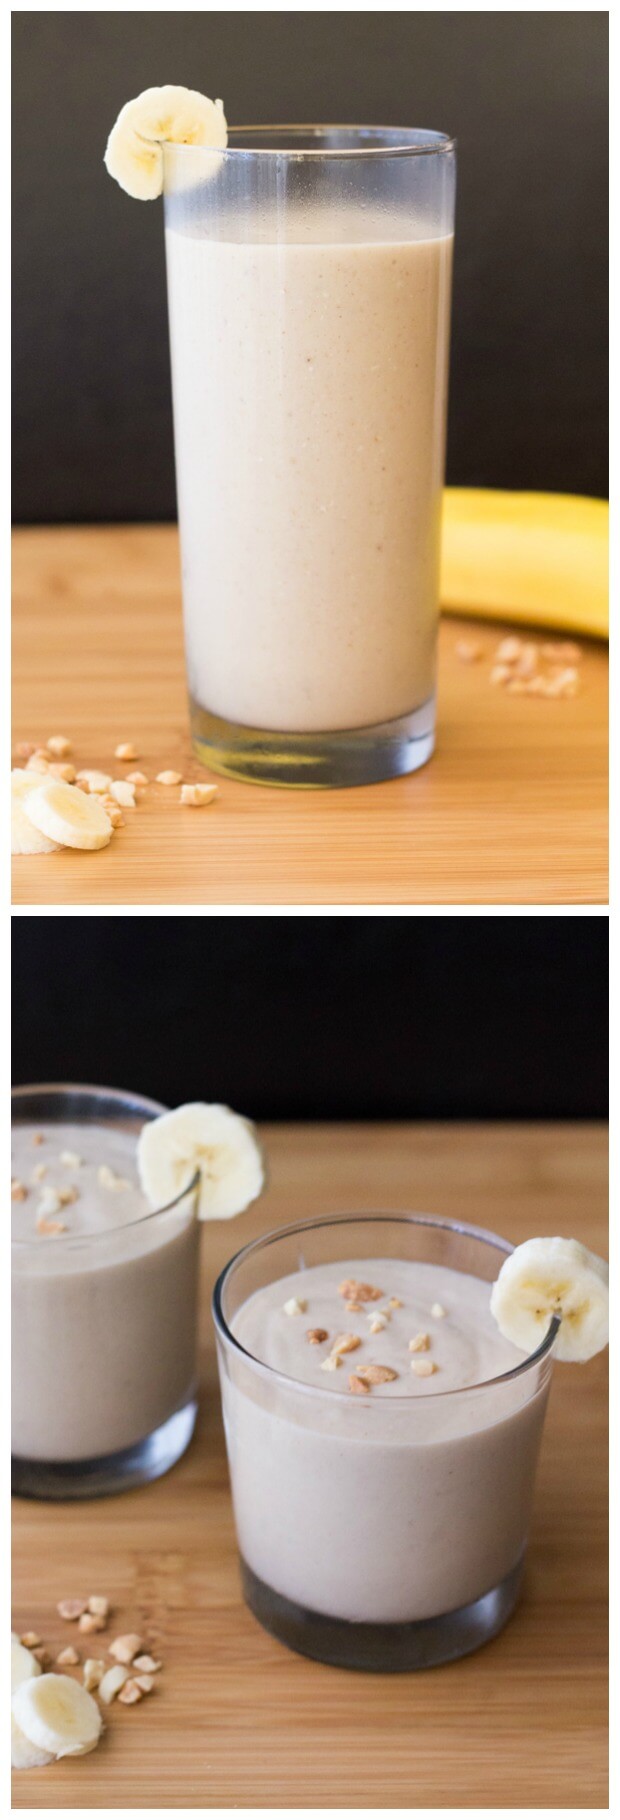 Thick & creamy Peanut Butter Banana Smoothie. Super delicious, healthy & filling - make it for breakfast or a post-workout snack!